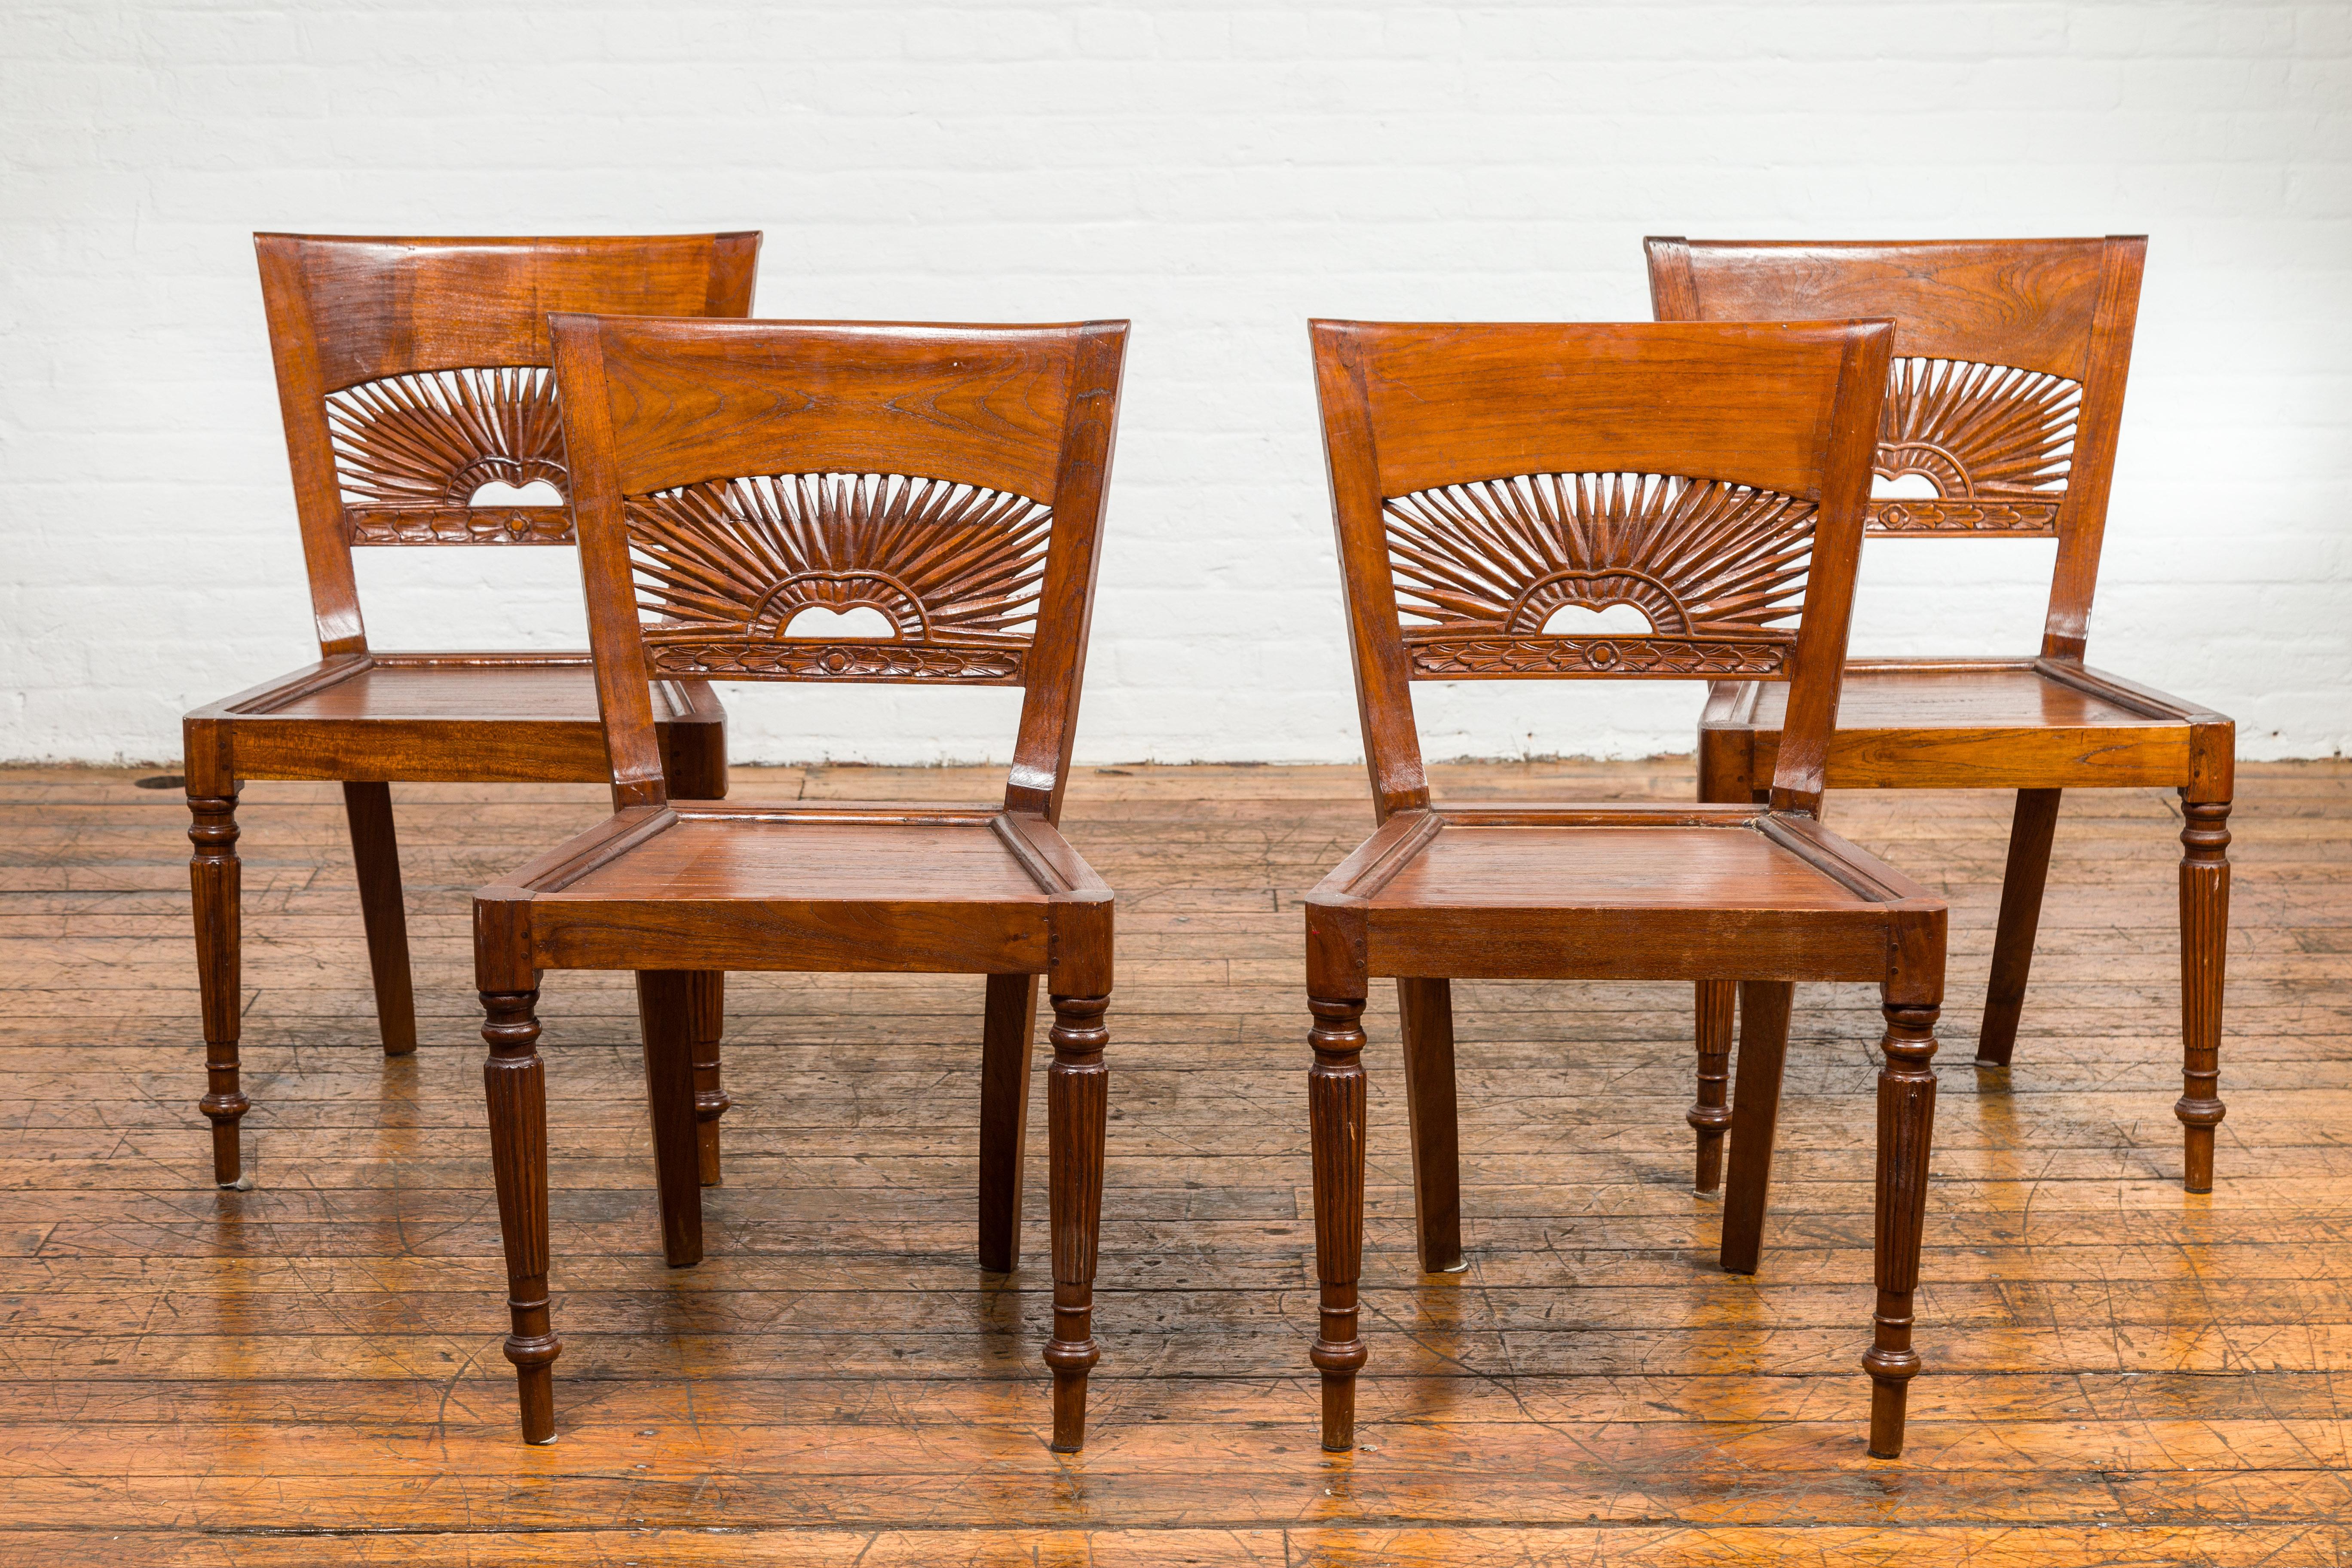 Dutch Colonial Teak Dining Room Chairs with Carved Radiating Backs, Set of Six For Sale 11